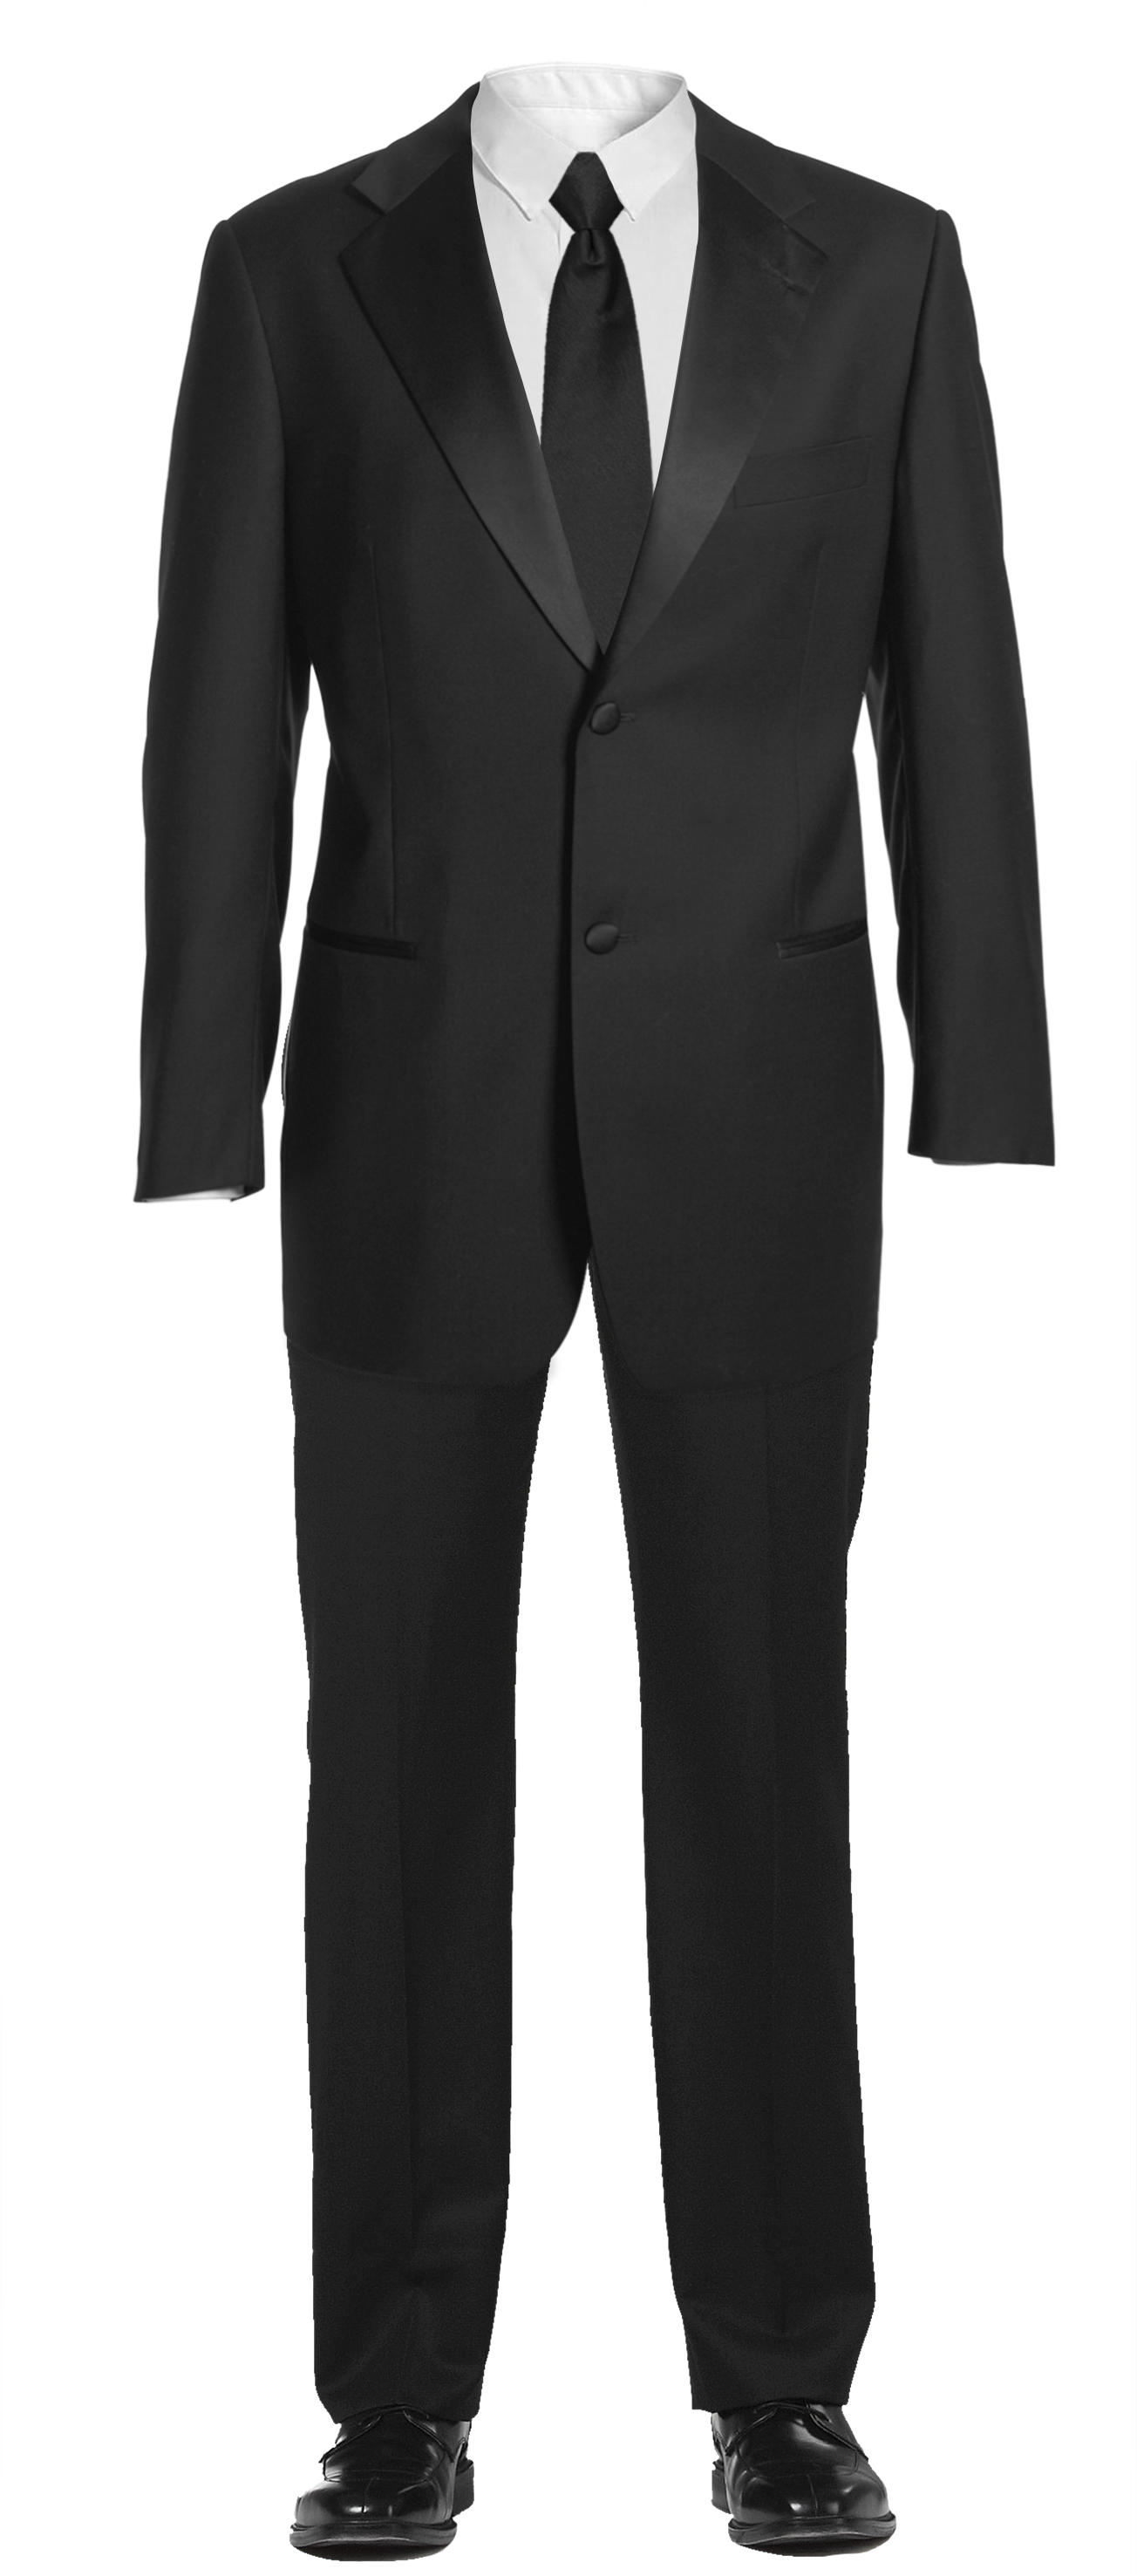 Download Uniform Tuxedo Png Image With No Background Pngkey Com